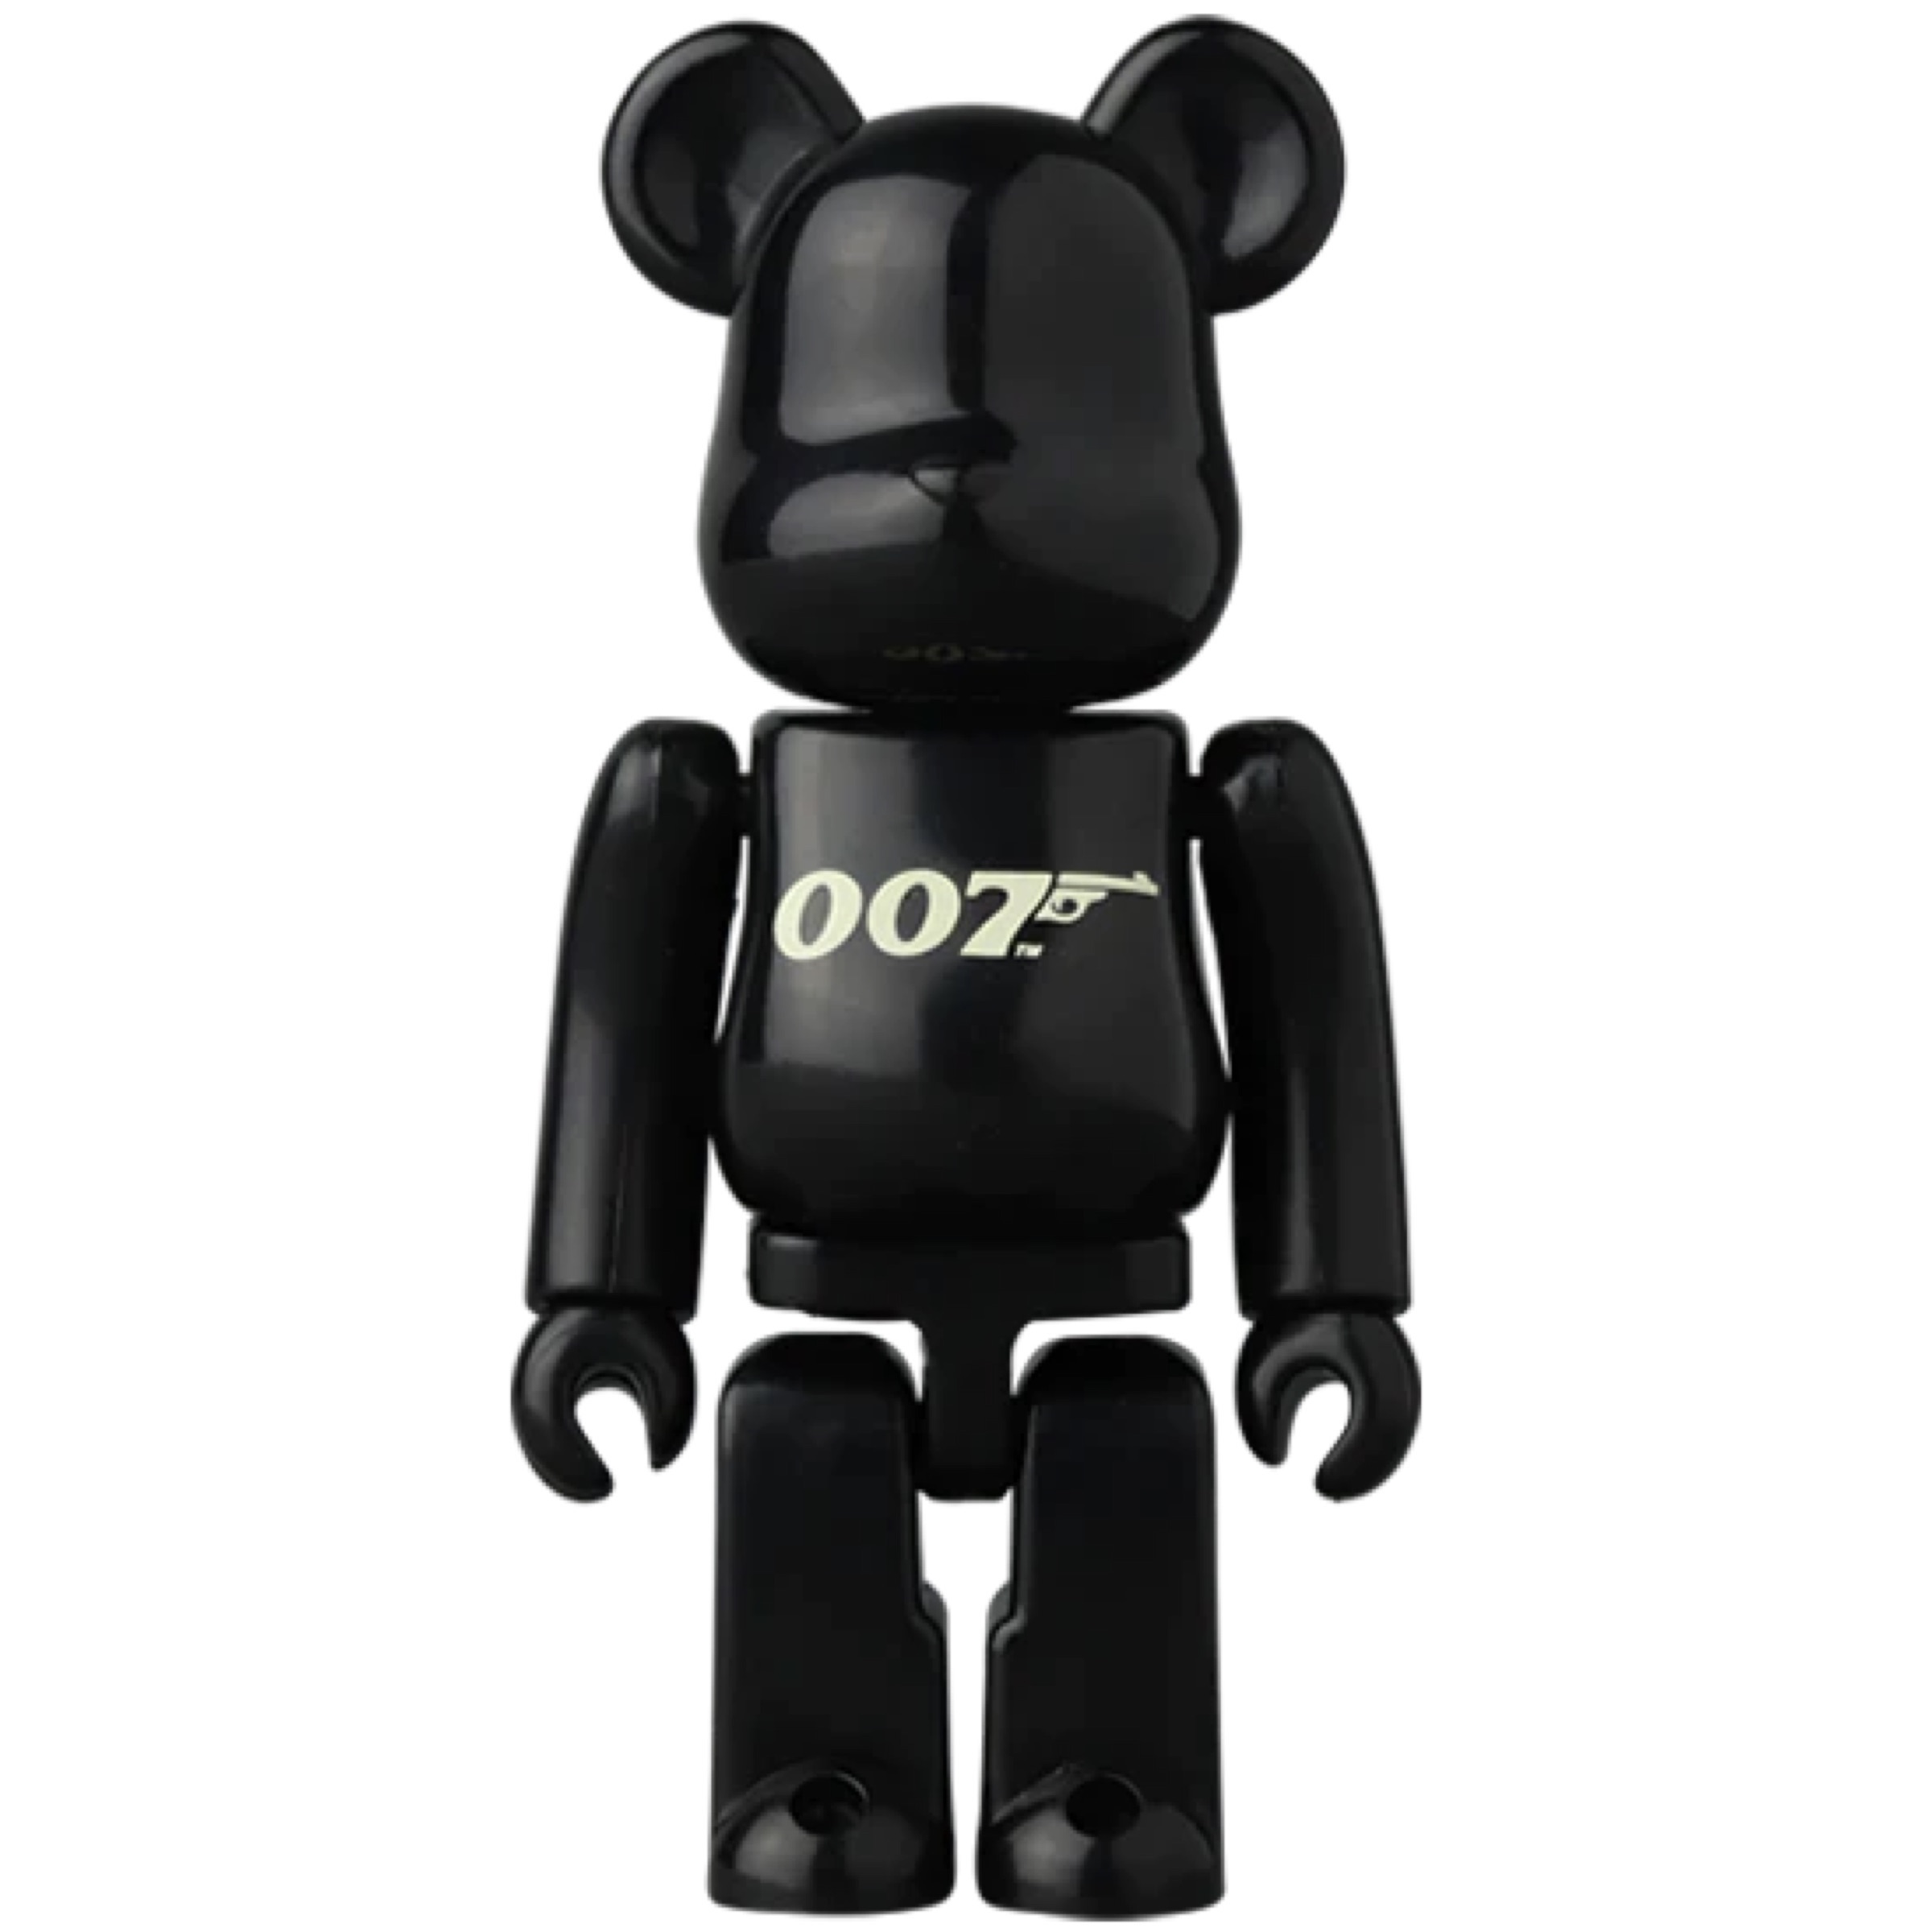 Bearbrick Blind Box Series 44 - Penguin Collectables